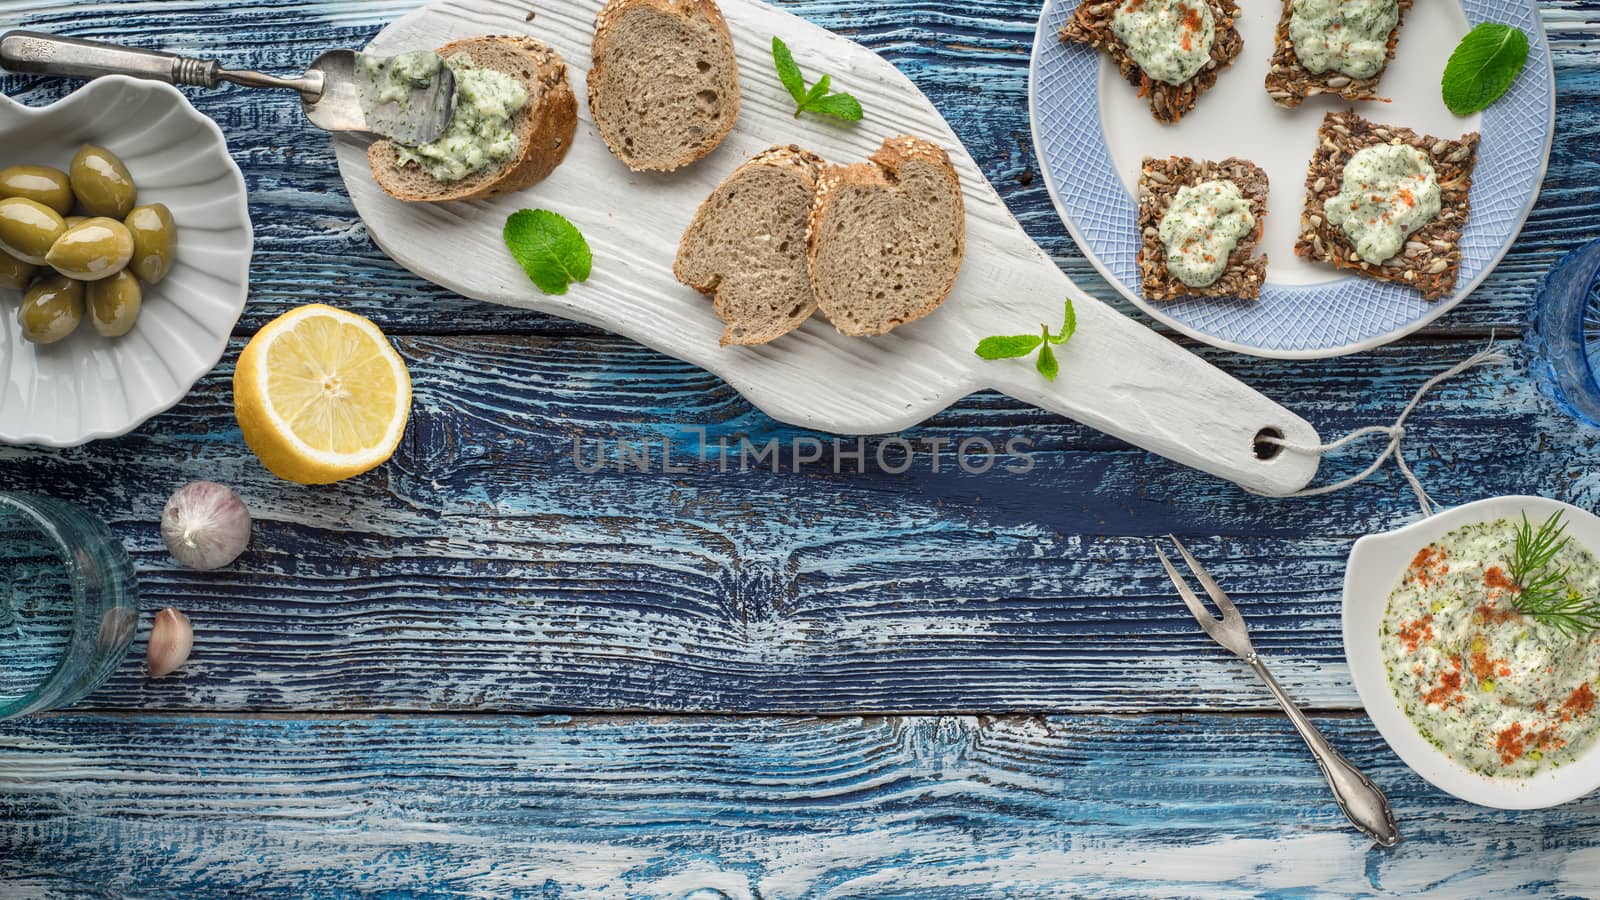 Bread with tzatziki on the blue wooden table with accessorize horizontal by Deniskarpenkov